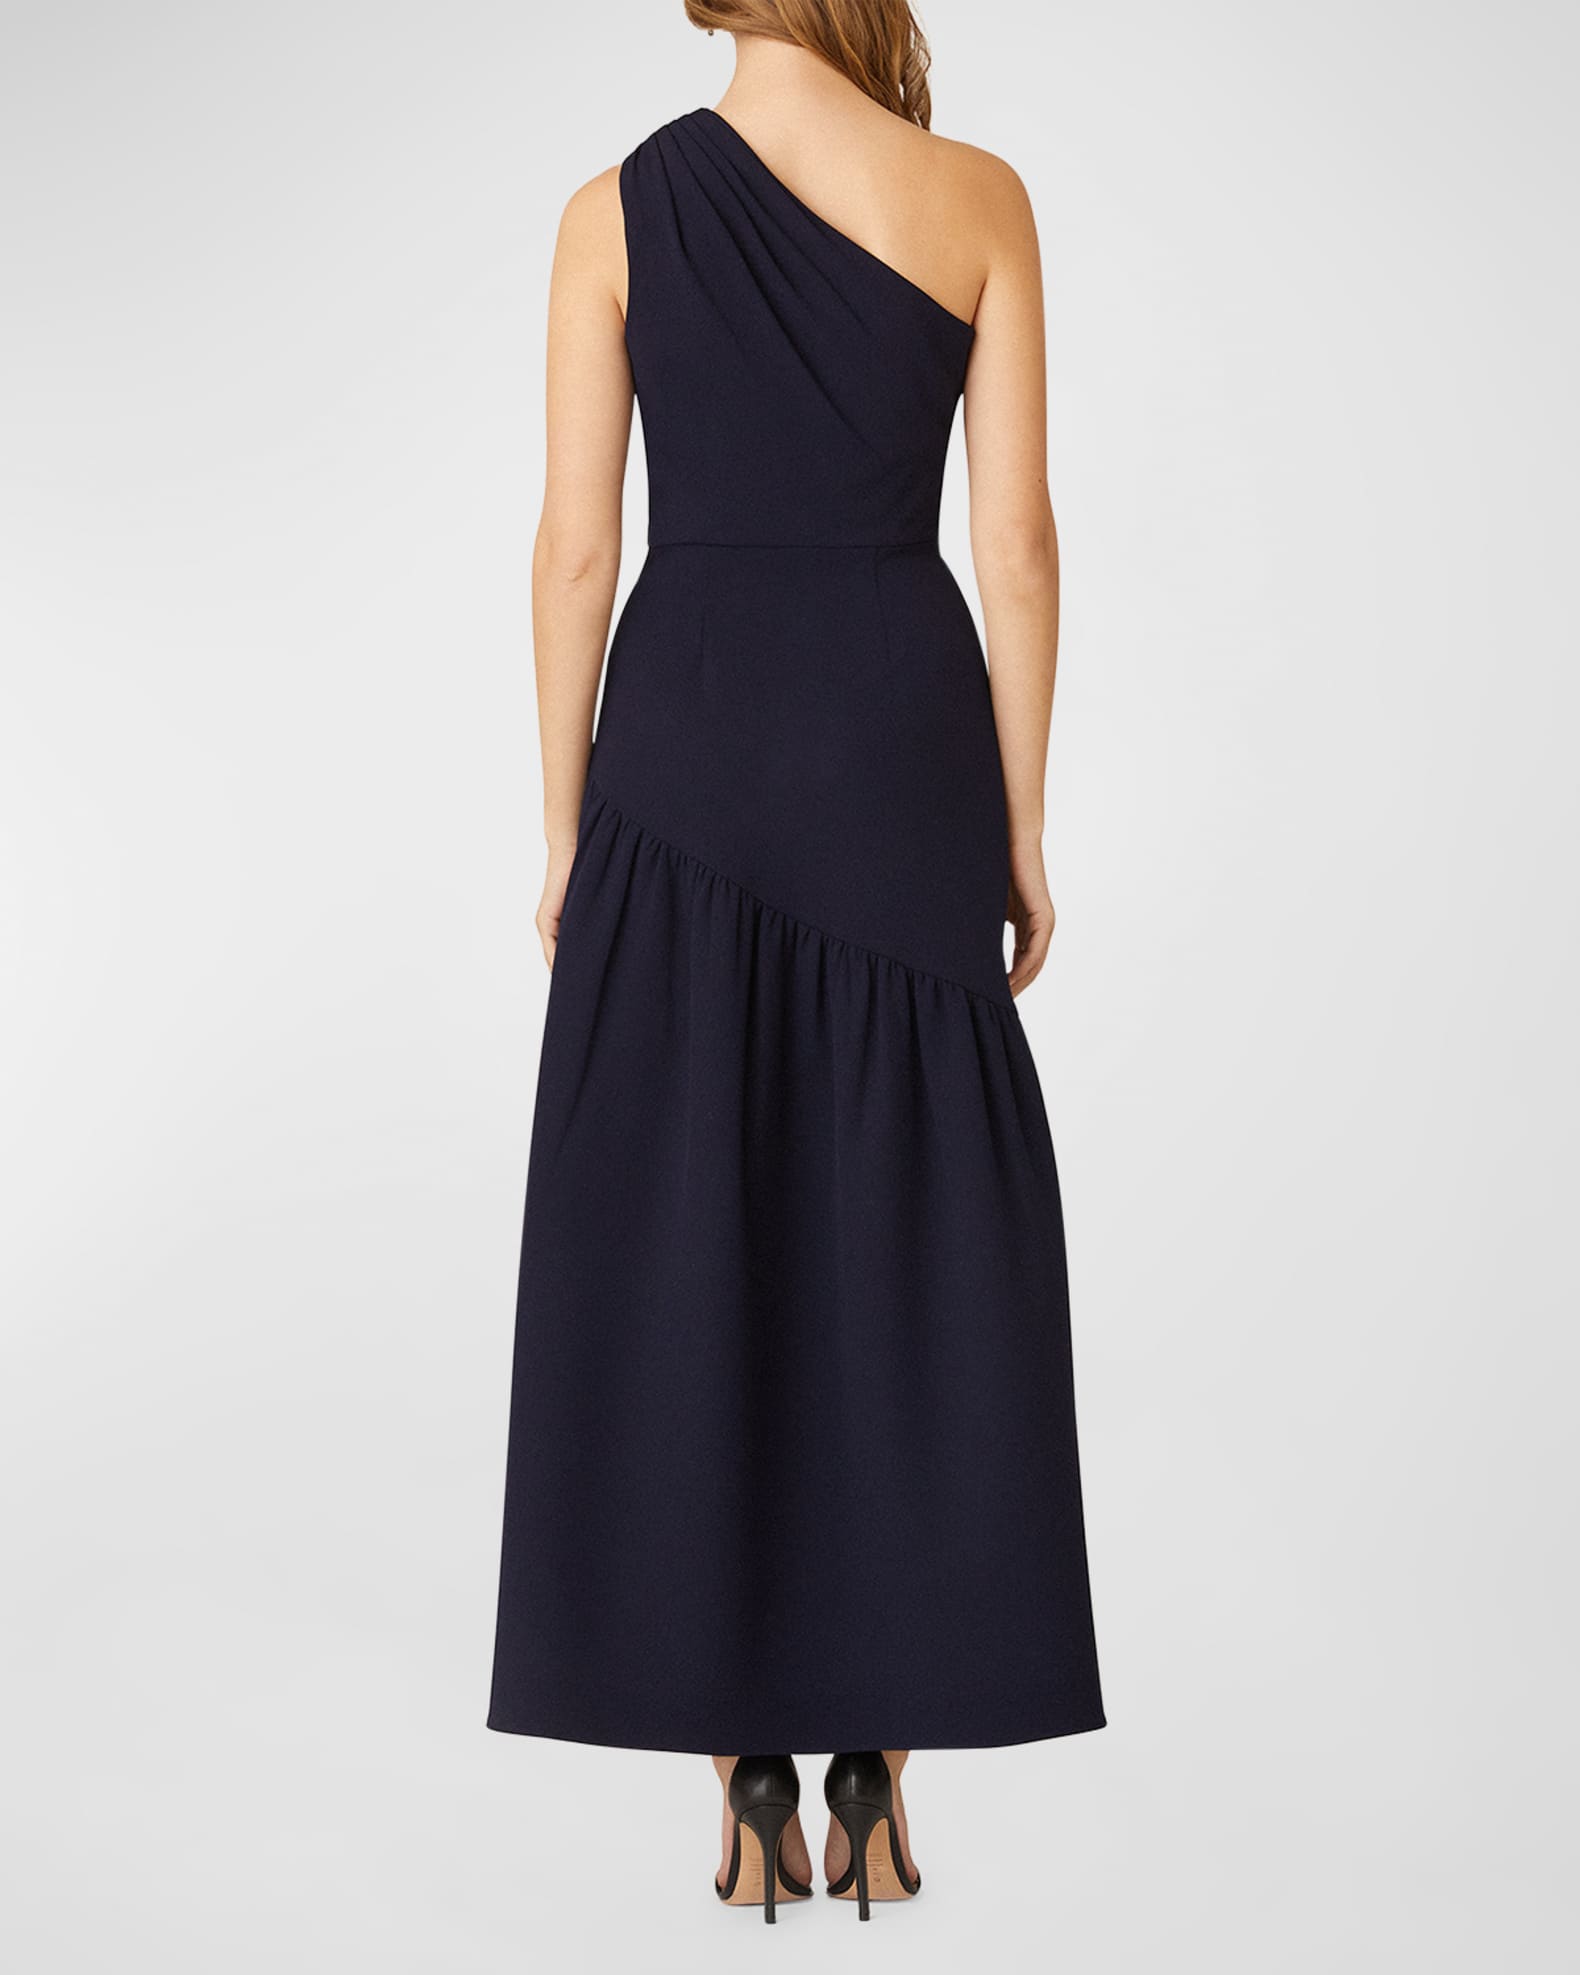 Shoshanna One-Shoulder Stretch Crepe Gown | Neiman Marcus